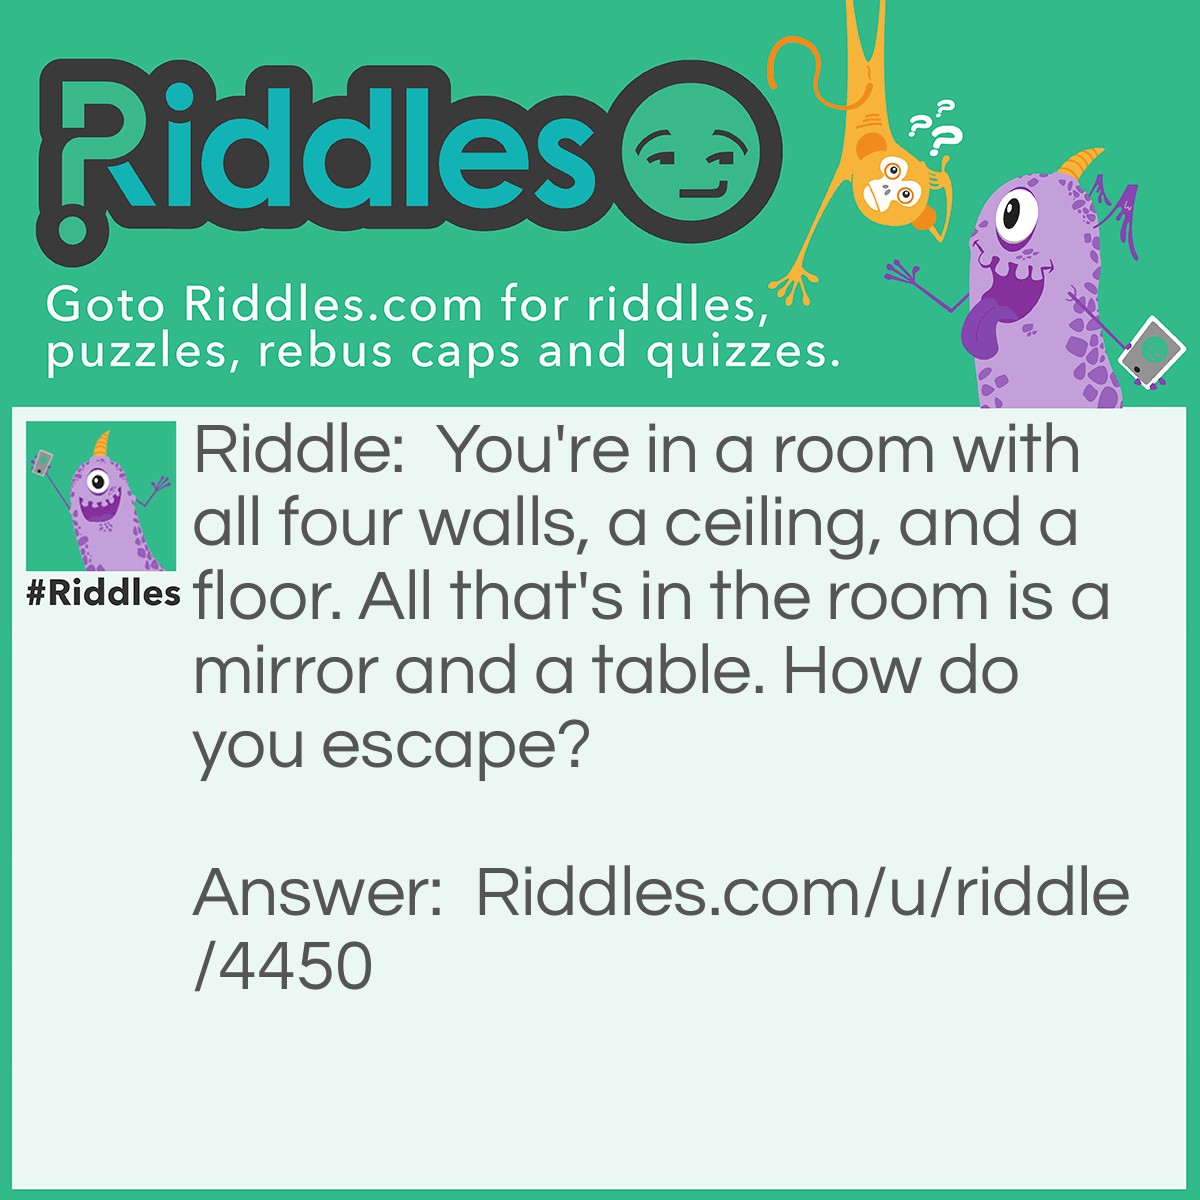 Riddle: You're in a room with all four walls, a ceiling, and a floor. All that's in the room is a mirror and a table. How do you escape? Answer: You look in the mirror you saw what you saw, you take the saw and saw through the table, the tables in half, two halves make a whole, you climb through the hole and try to scream for help, your voice is to horse, you climb on the horse and ride away. XD